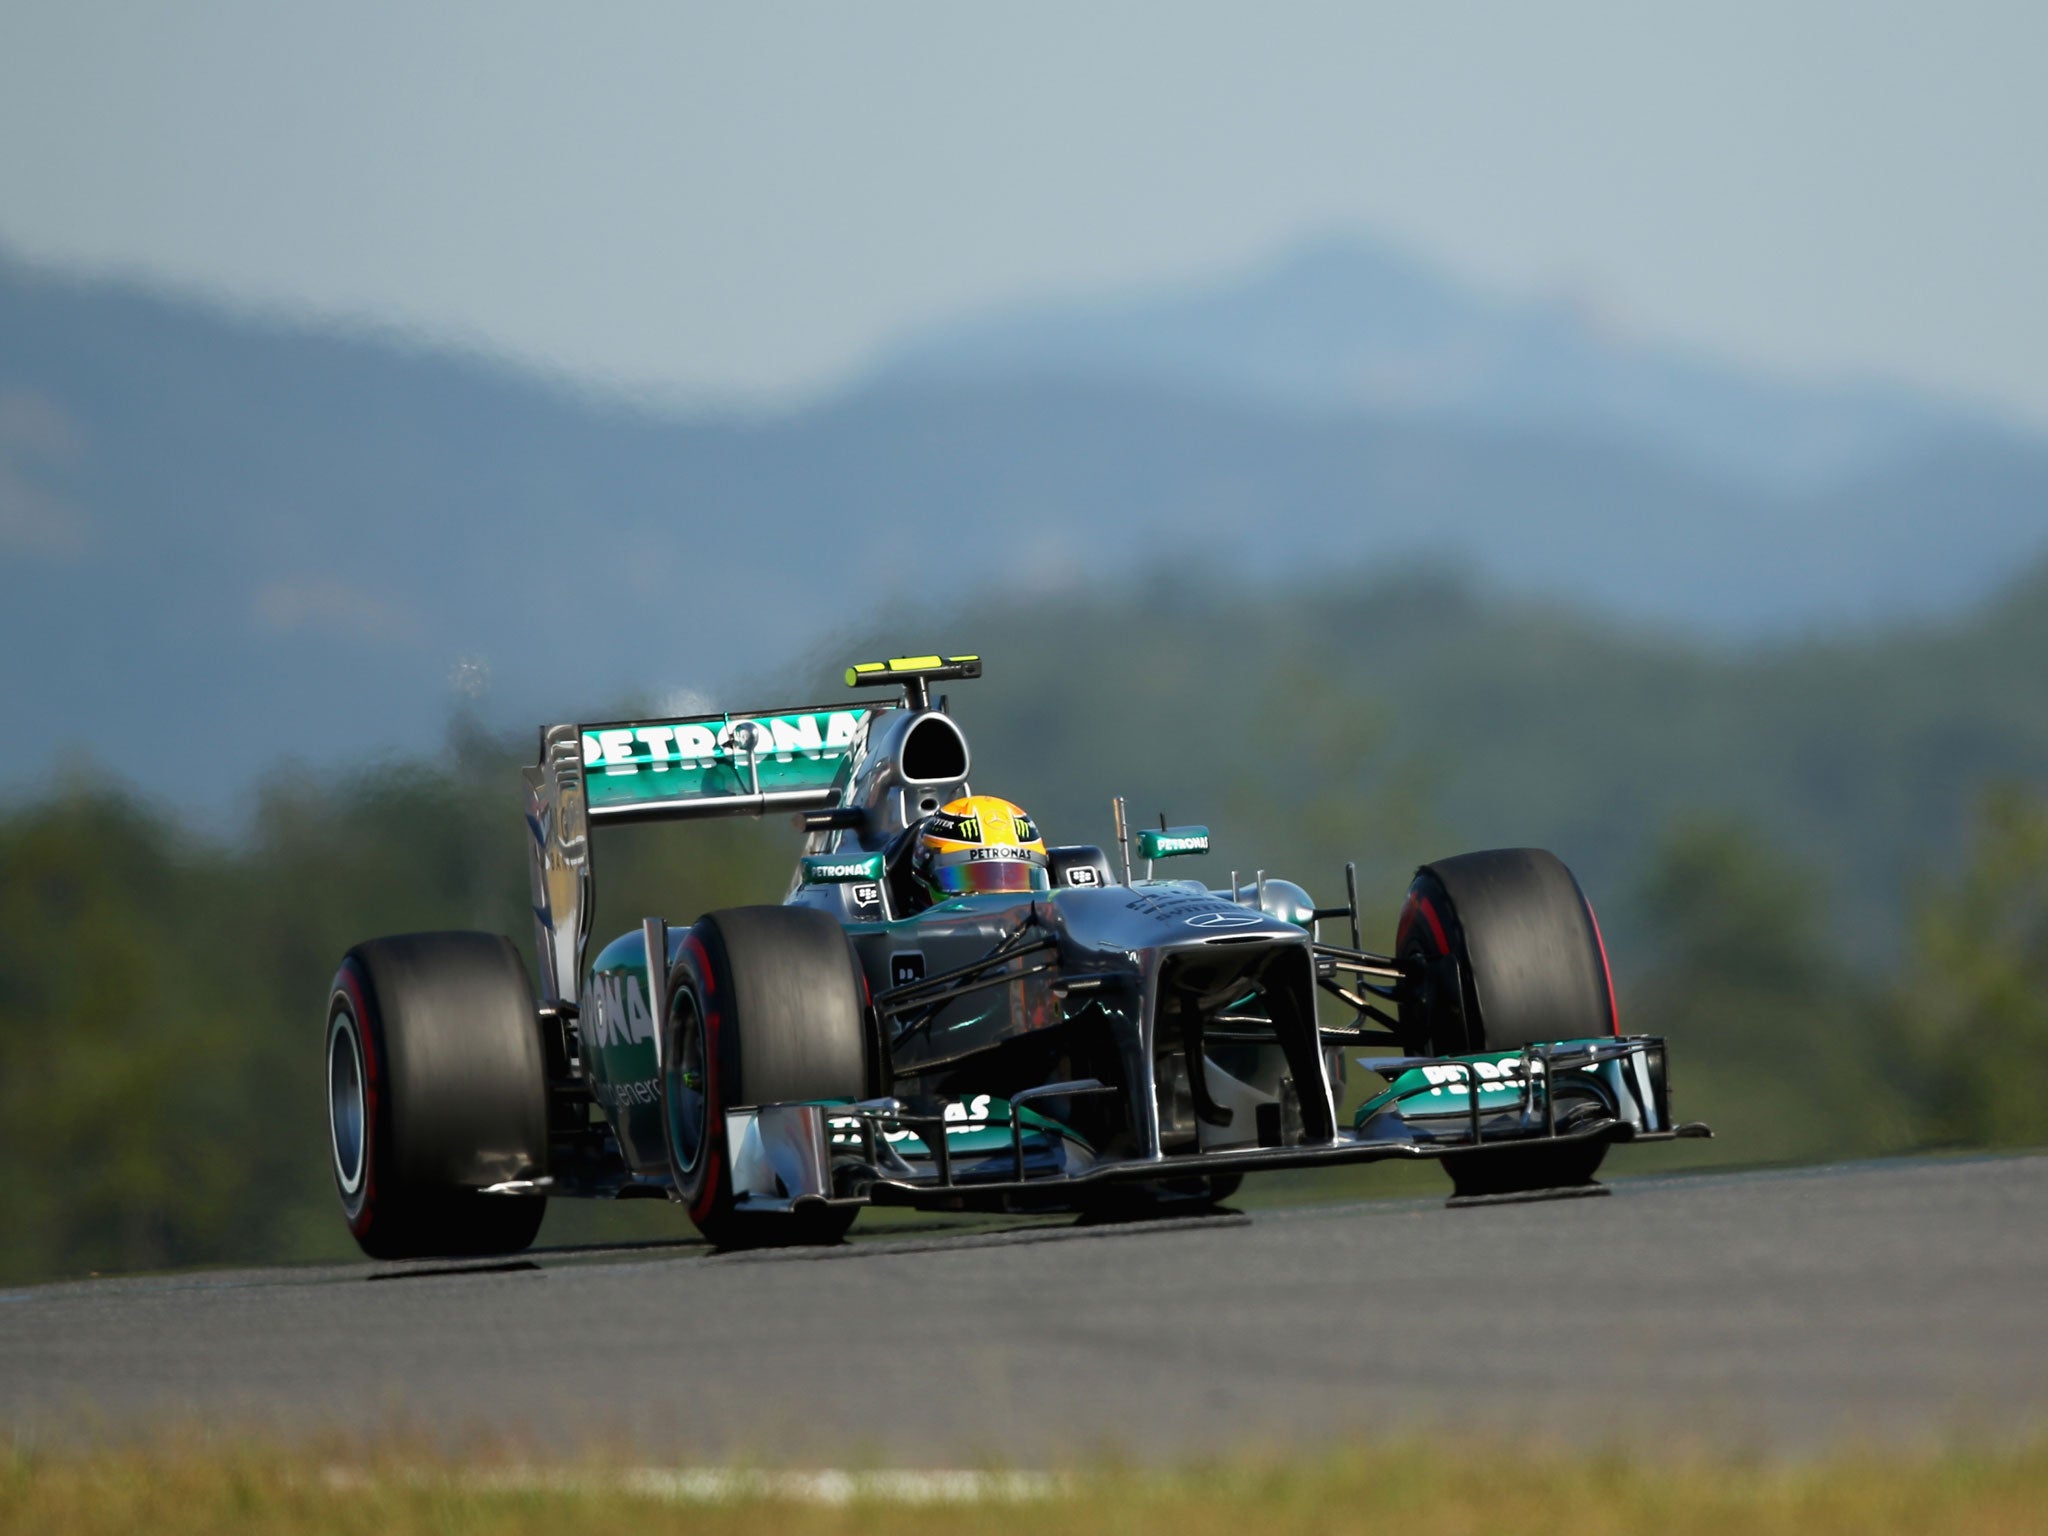 Lewis Hamilton was fastest in both Friday sessions in Korea